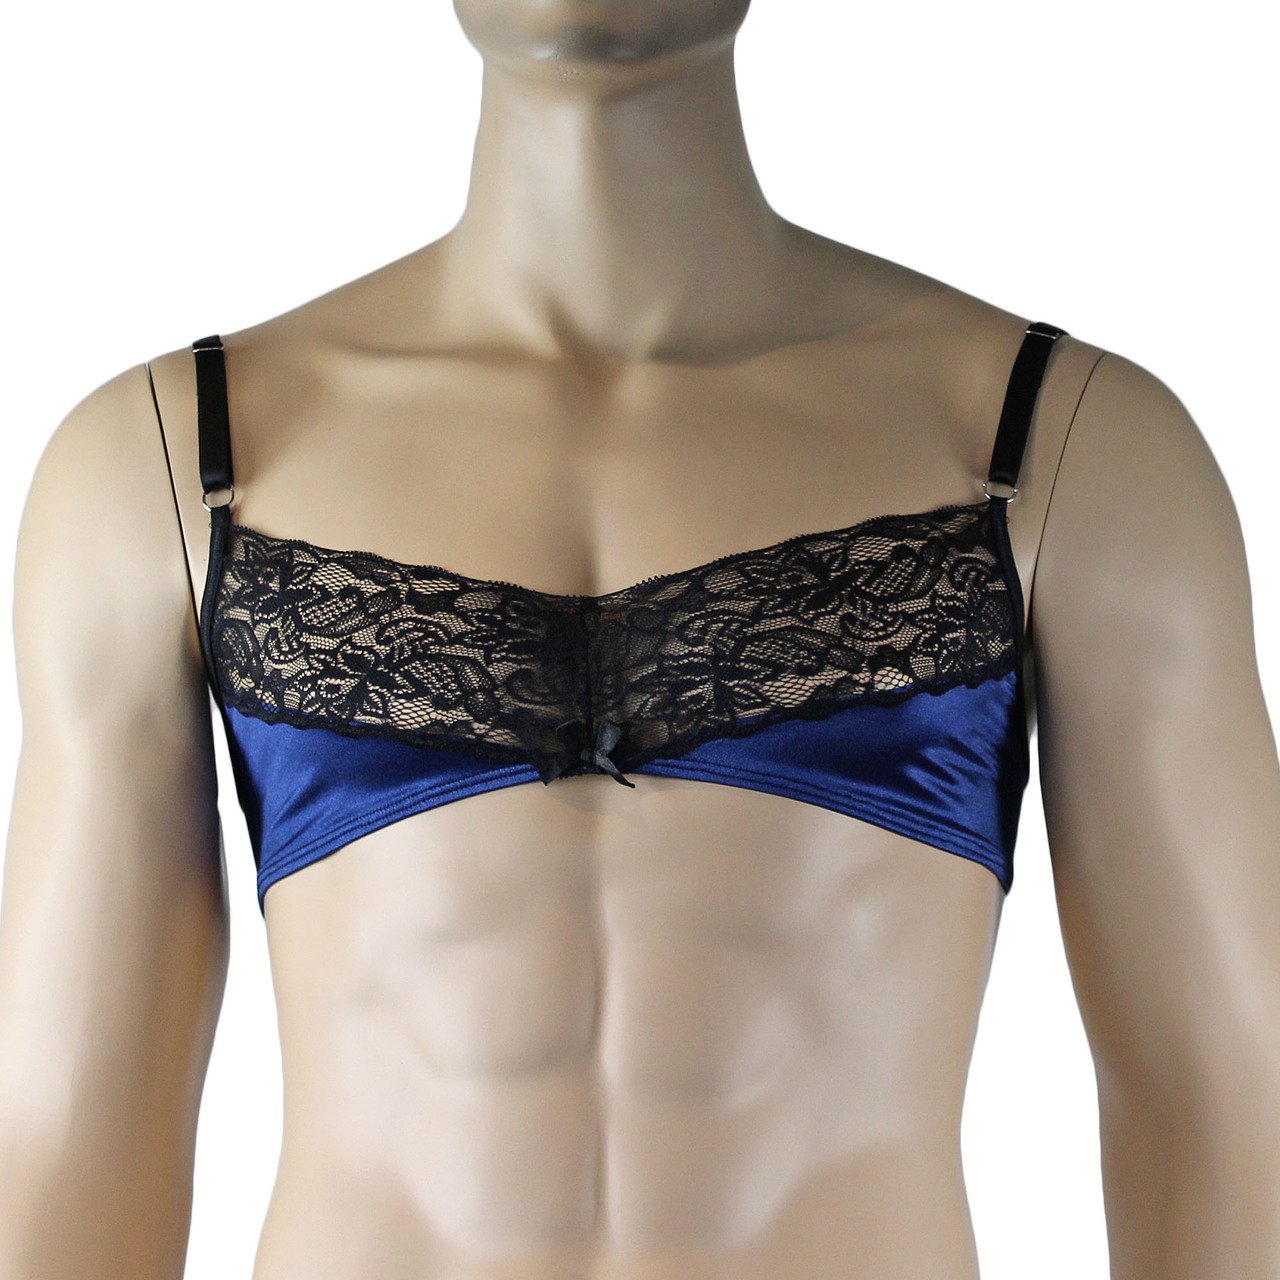 Mens Glamour Bra Top and Pouch G string with Lace Trim (navy & black plus other colours)